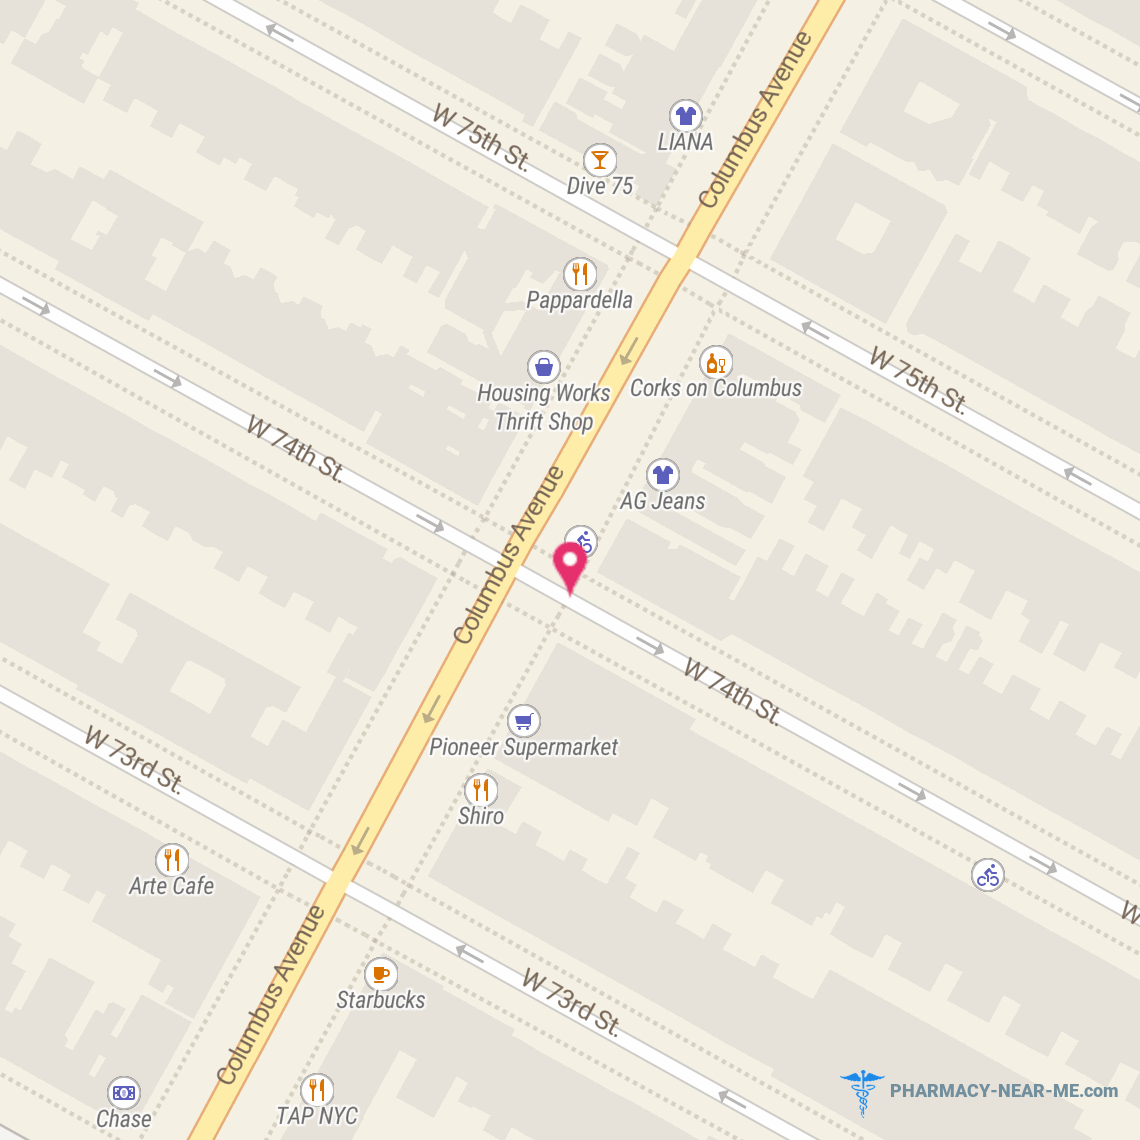 THERAPIE NY - Pharmacy Hours, Phone, Reviews & Information: 309 Columbus Avenue, New York, New York 10023, United States